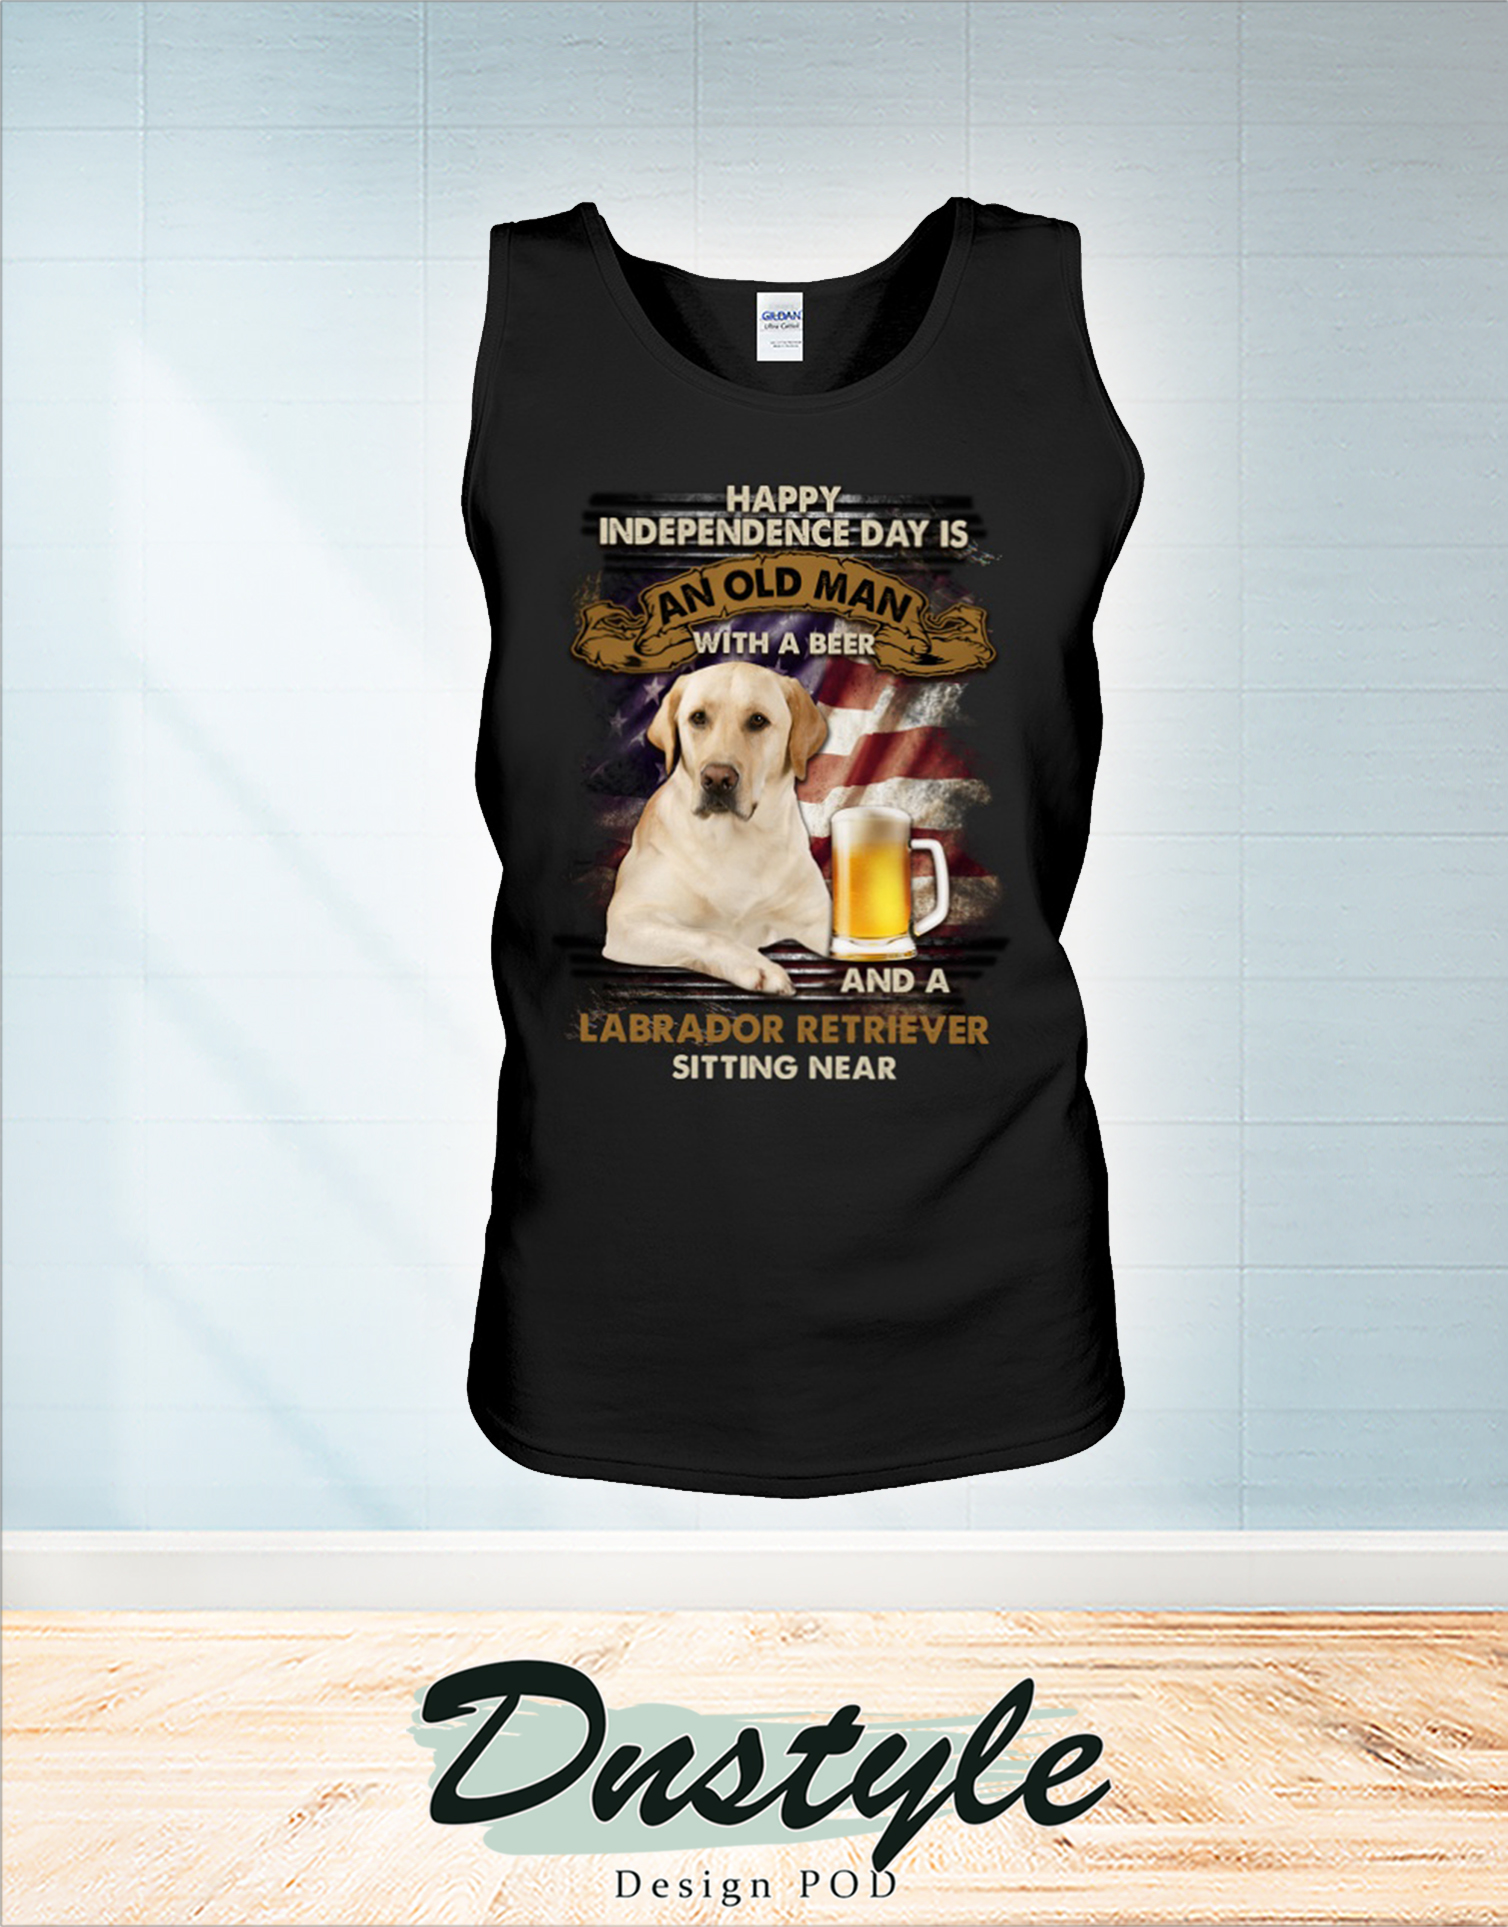 Happy independence day is an old man with a beer and a Labrador retriever sitting near t-shirt